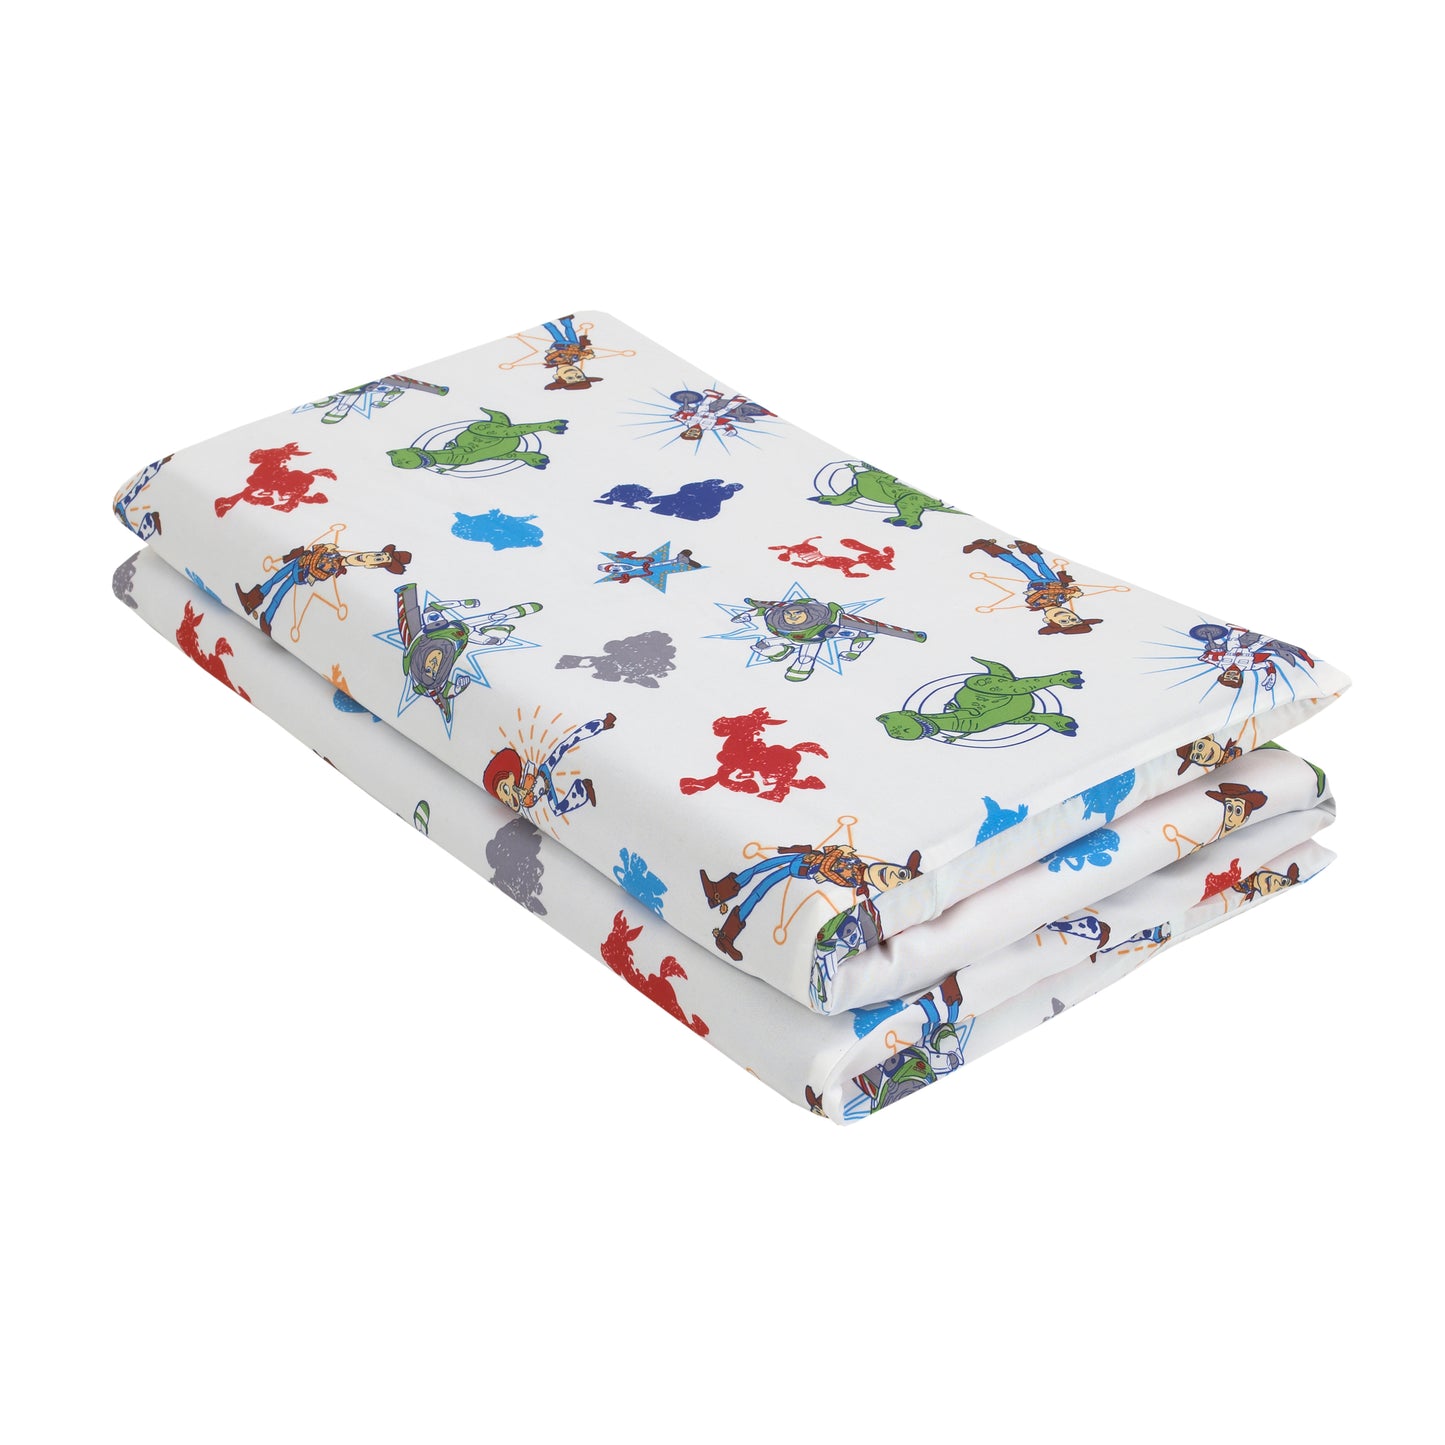 Disney Toy Story 4 - Blue, Green, Red and White Preschool Nap Pad Sheet